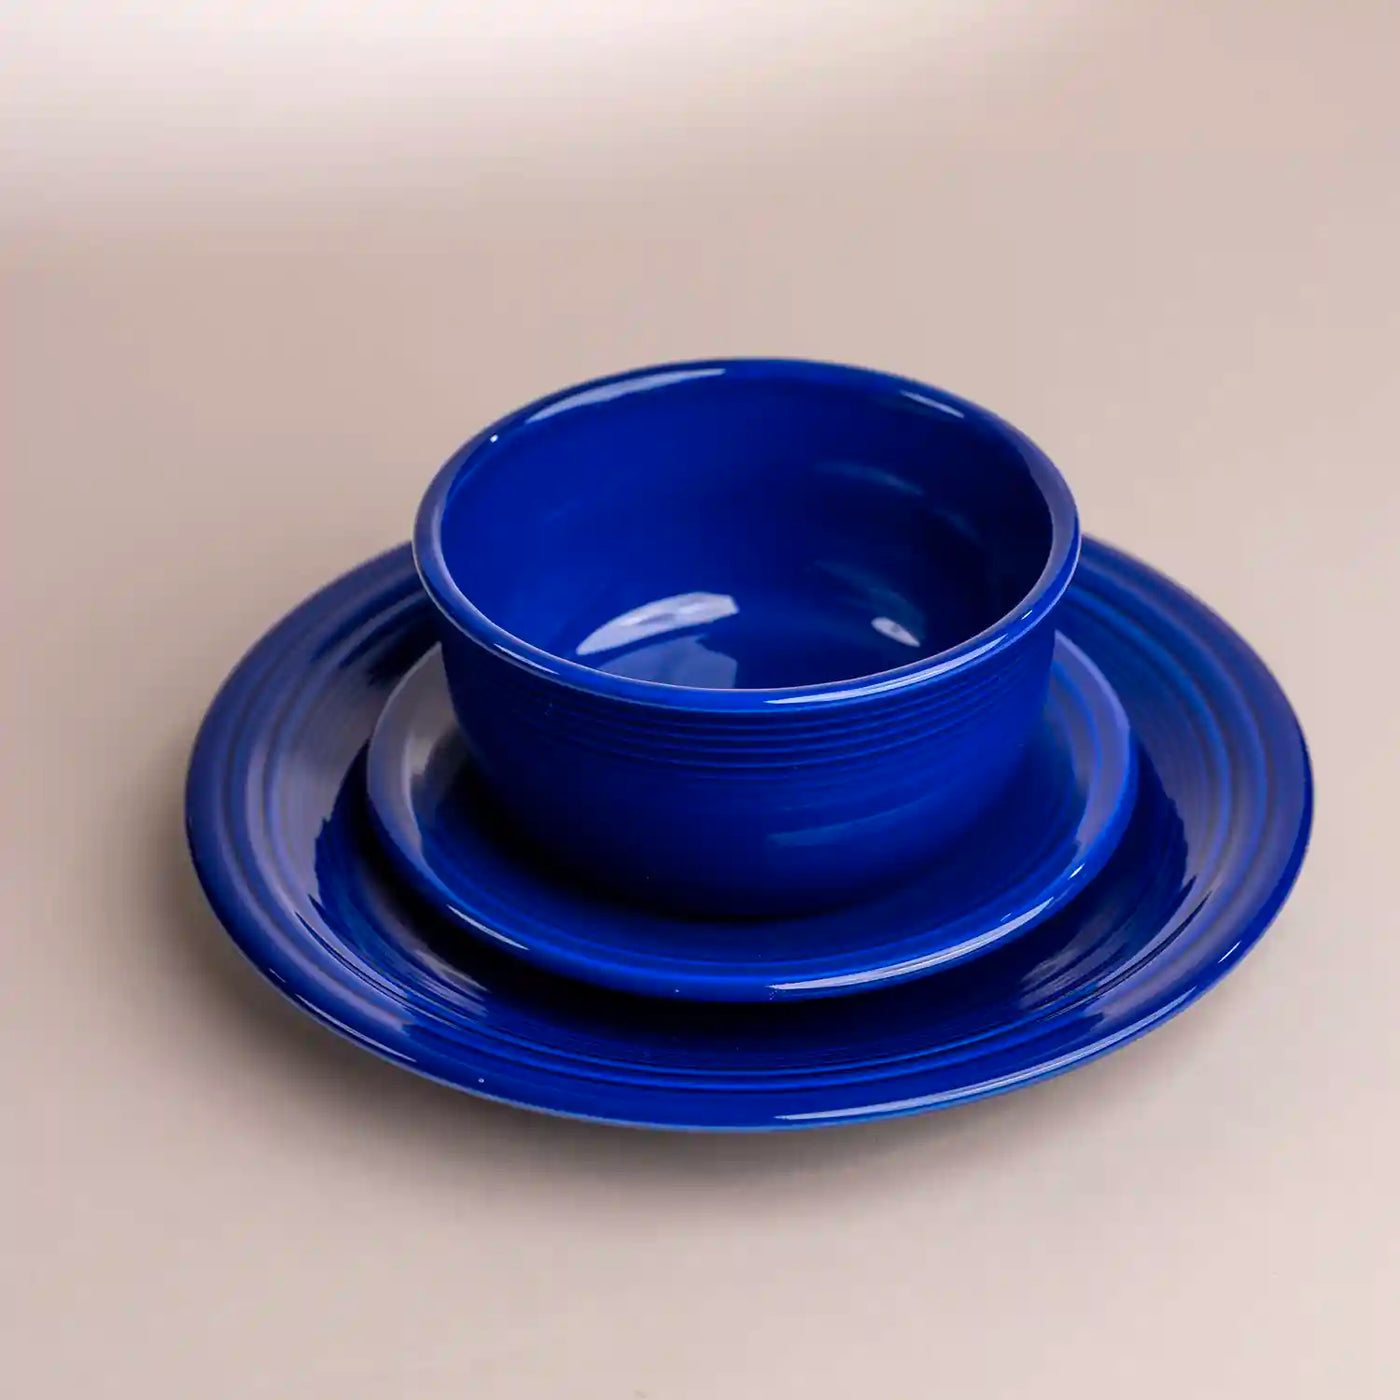 Fiesta twilight blue dinner plate salad plate and gusto bowl